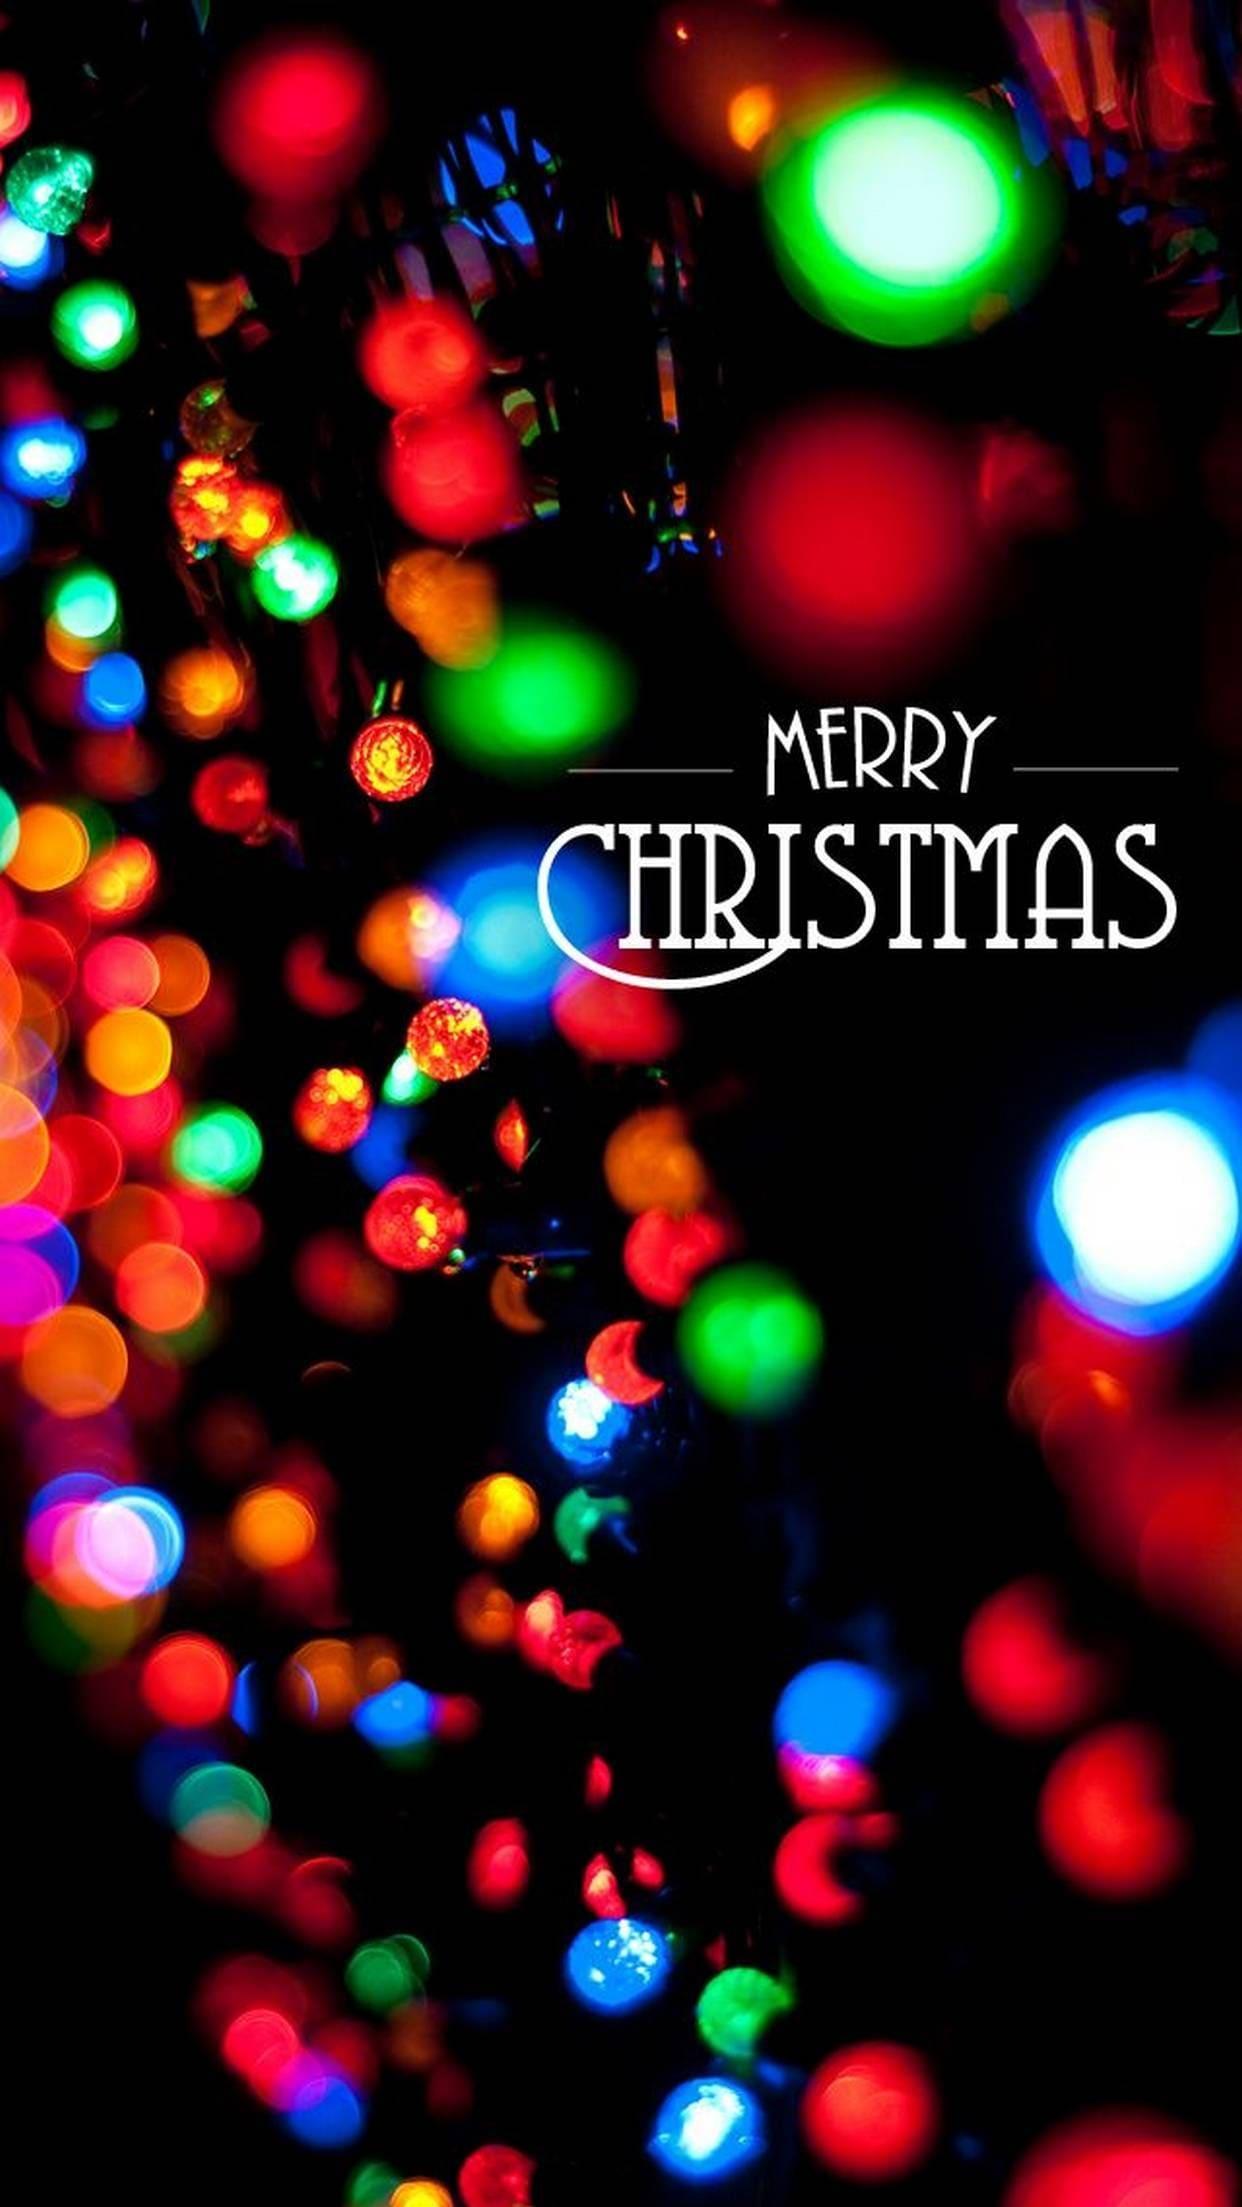 Try To Use Christmas Wallpaper For iPhones